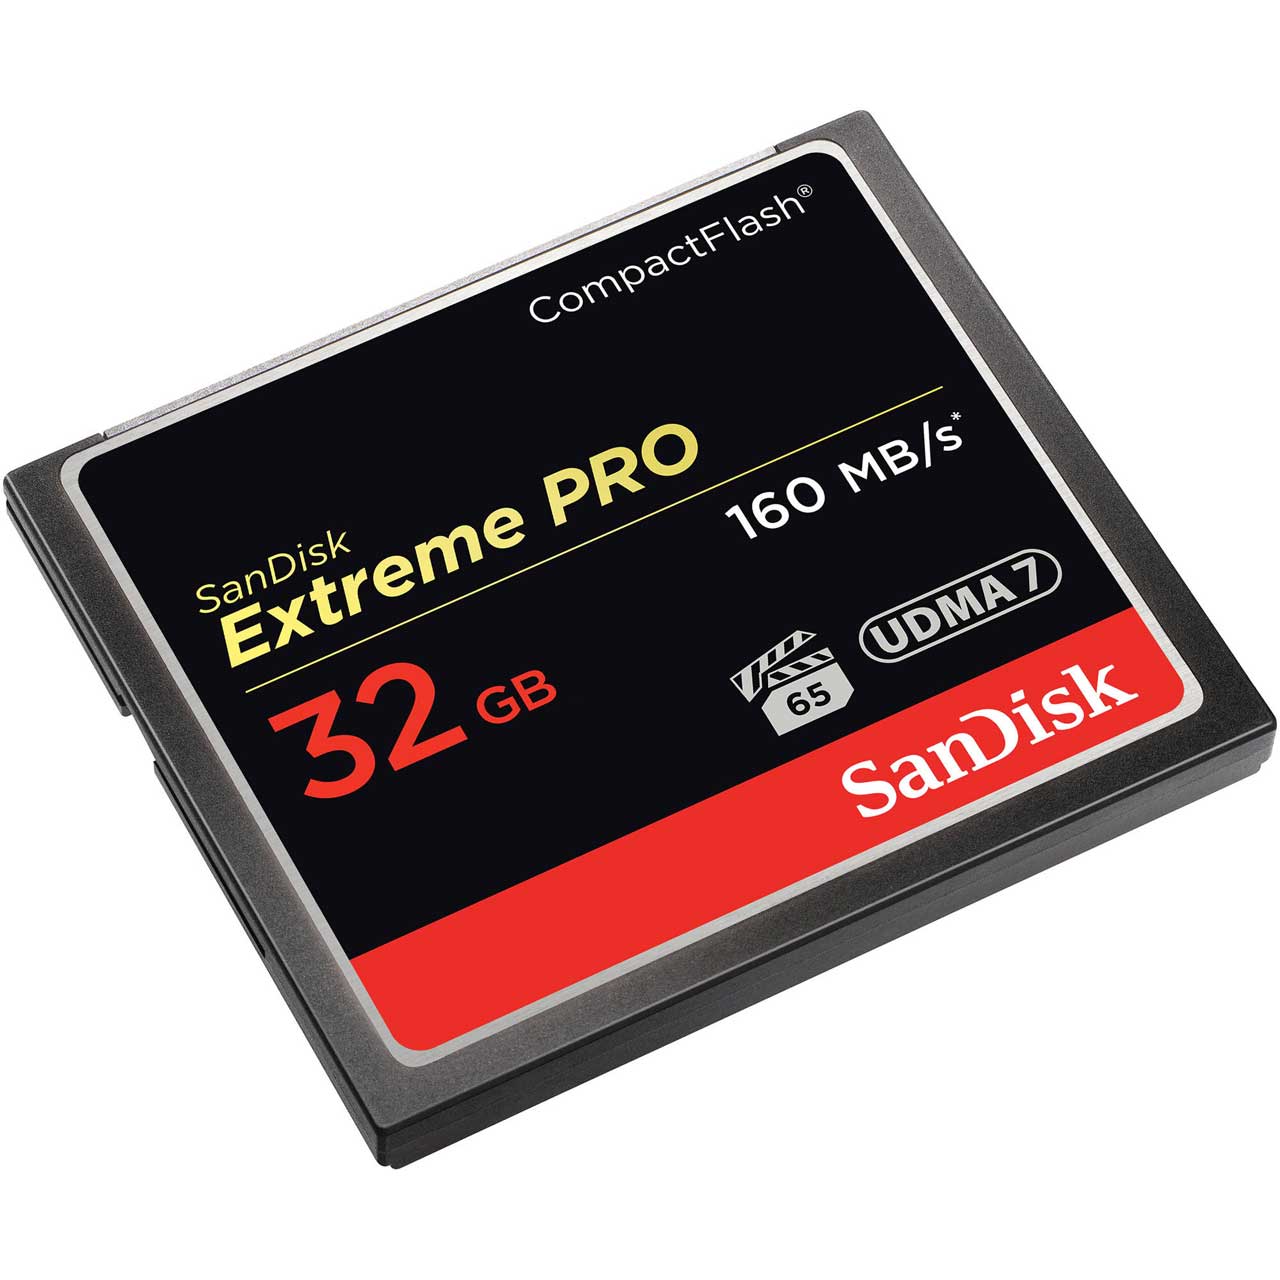 SanDisk SDCFXPS-032G-A46 Extreme Pro CompactFlash 32GB Memory Card SDCFXPS-032G-A46